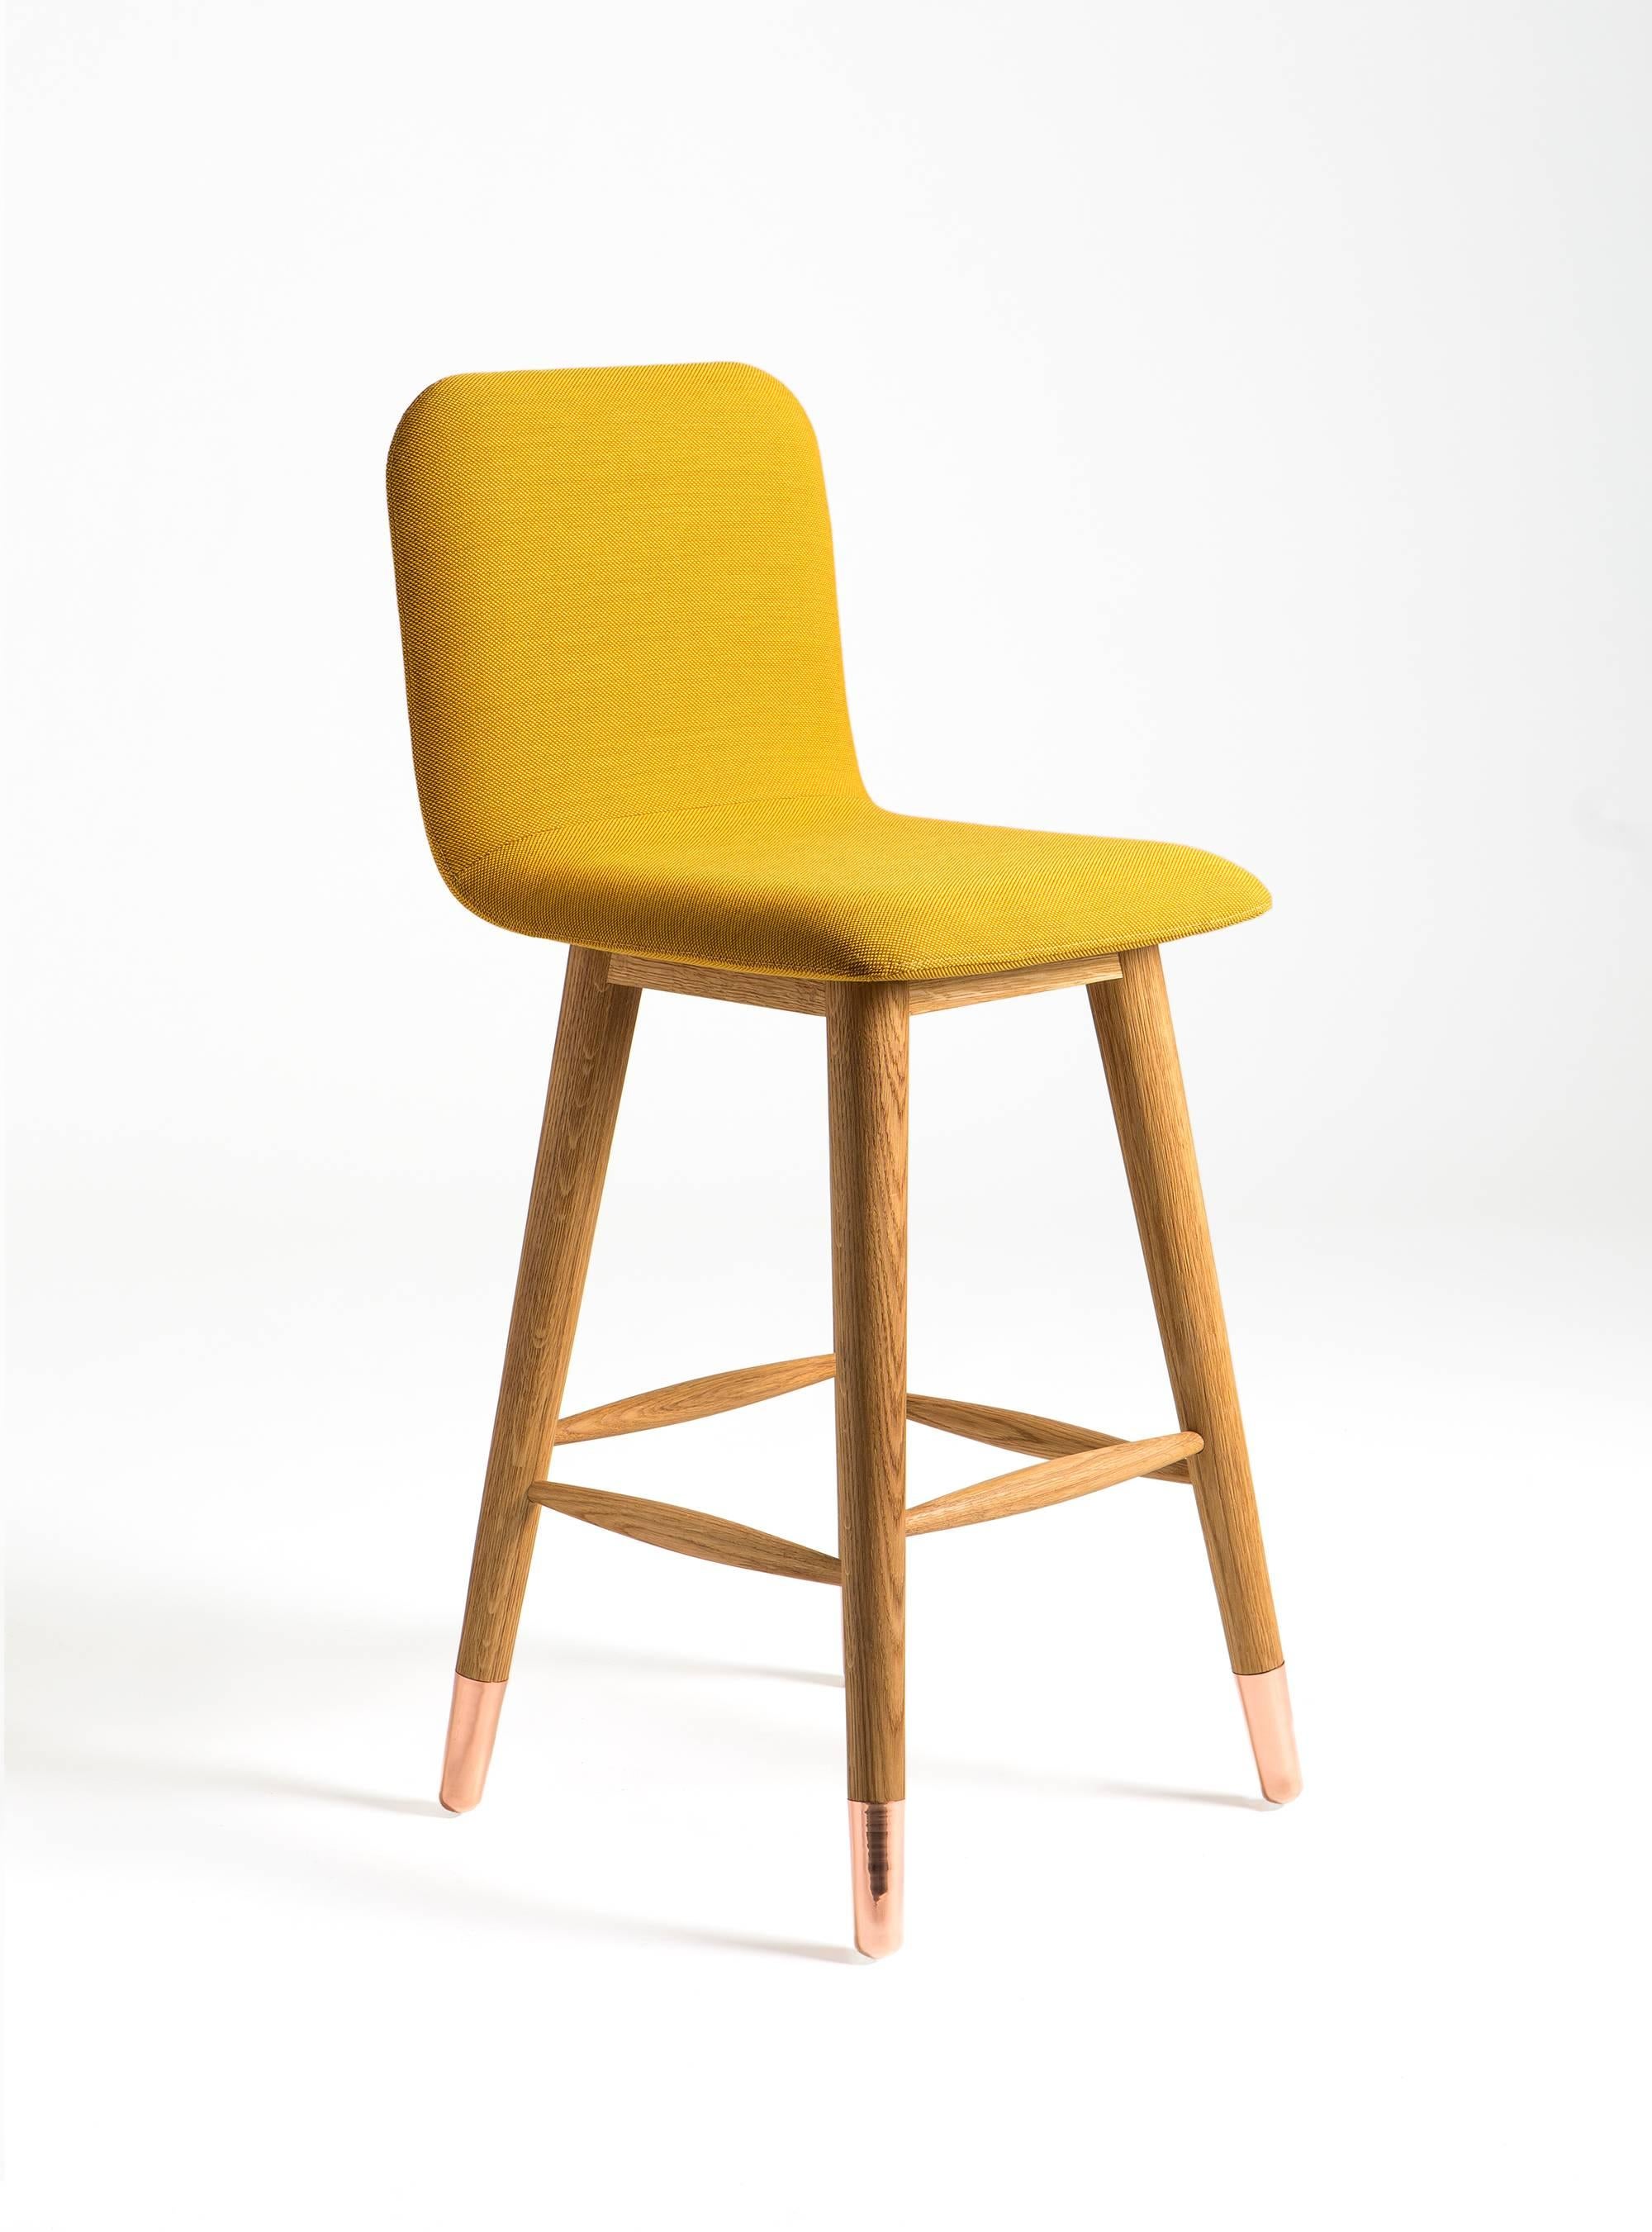 Mistral bar stool is designed to bring fresh, modern, natural style to its environment. Polished copper and white American oak legs are combined with colorful fabrics.